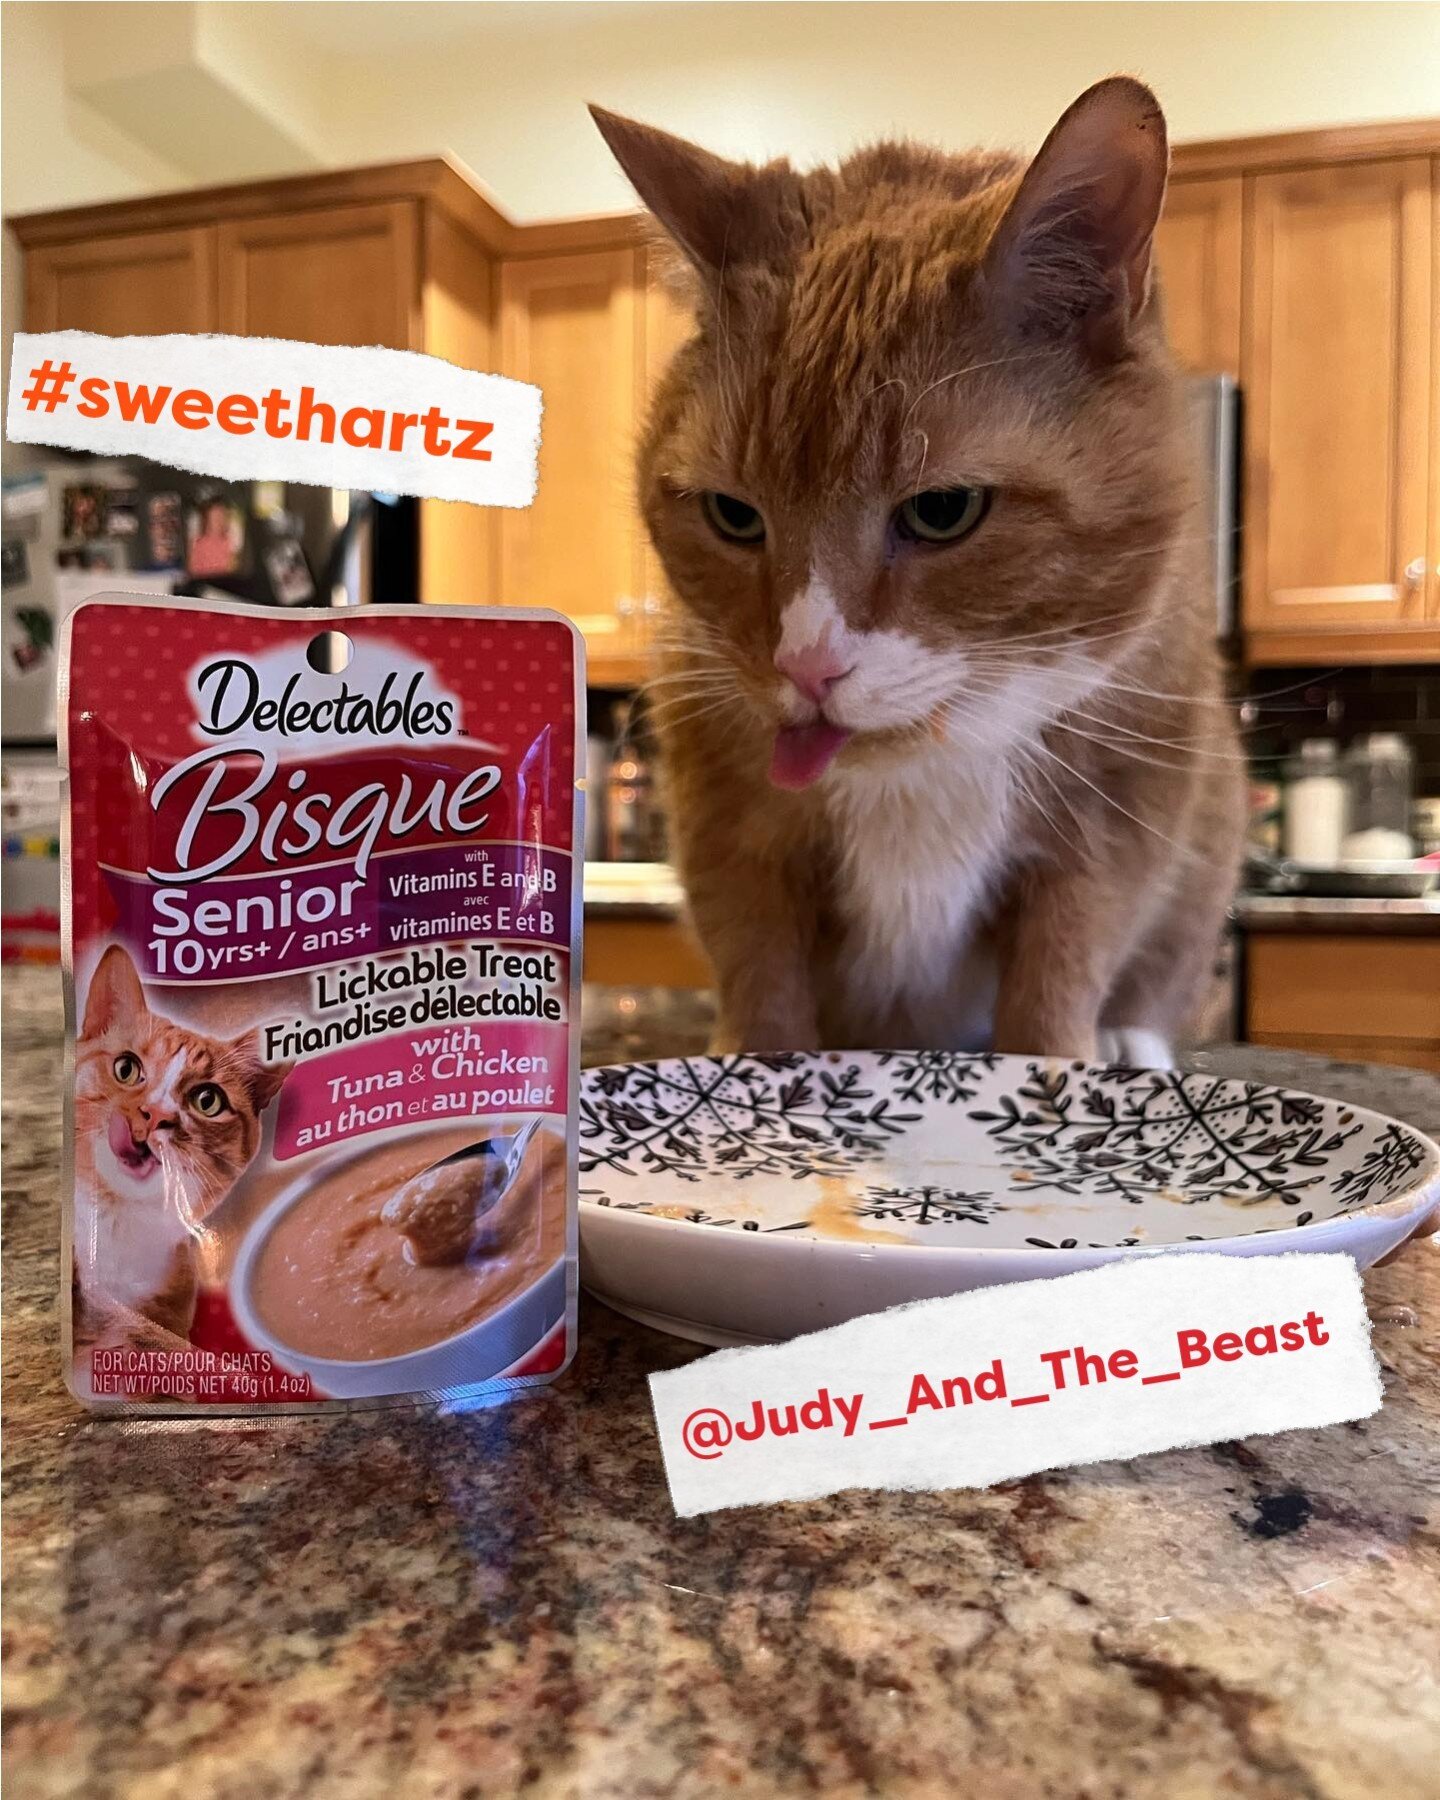 We mean it when we say that #DelickableDelectables cat treats are so delicious, your cat will lick the bowl clean every time! 👅 Don&rsquo;t believe us? Test the theory for yourself&hellip; Like @judy_and_the_beast! 😋🐱#UnconditionalLove #Sweethartz